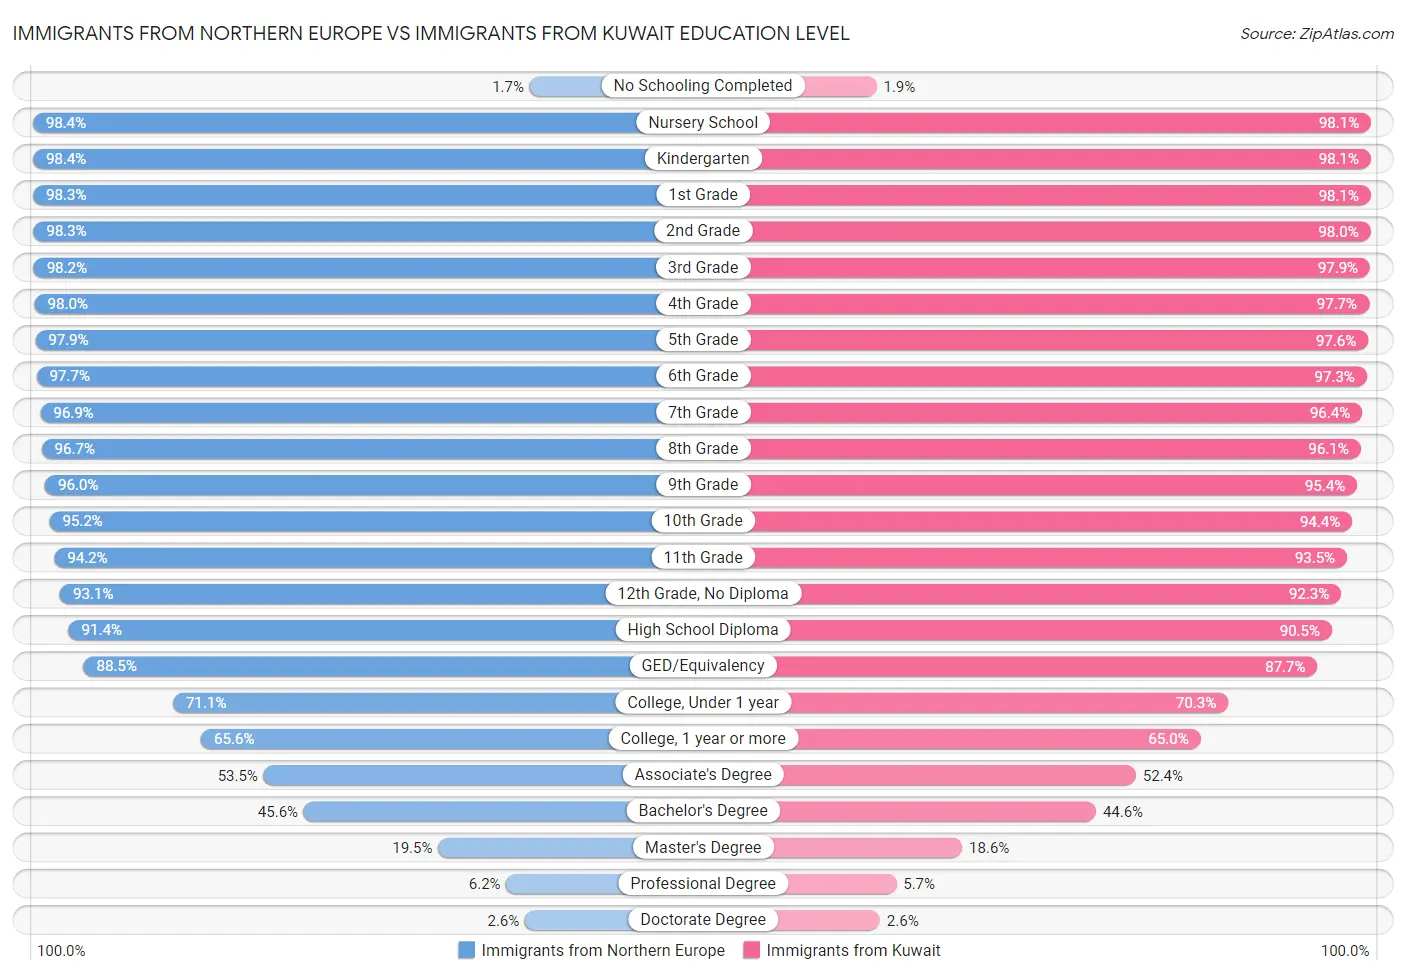 Immigrants from Northern Europe vs Immigrants from Kuwait Education Level